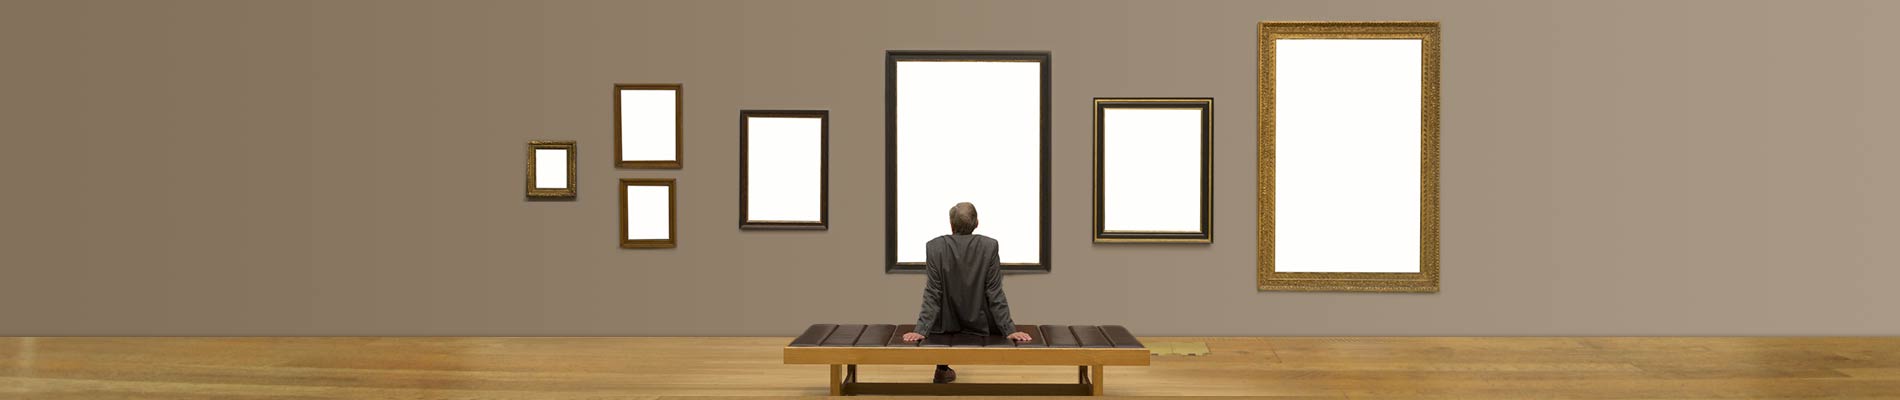 A man sitting on a bench within a room with seven blank picture frames